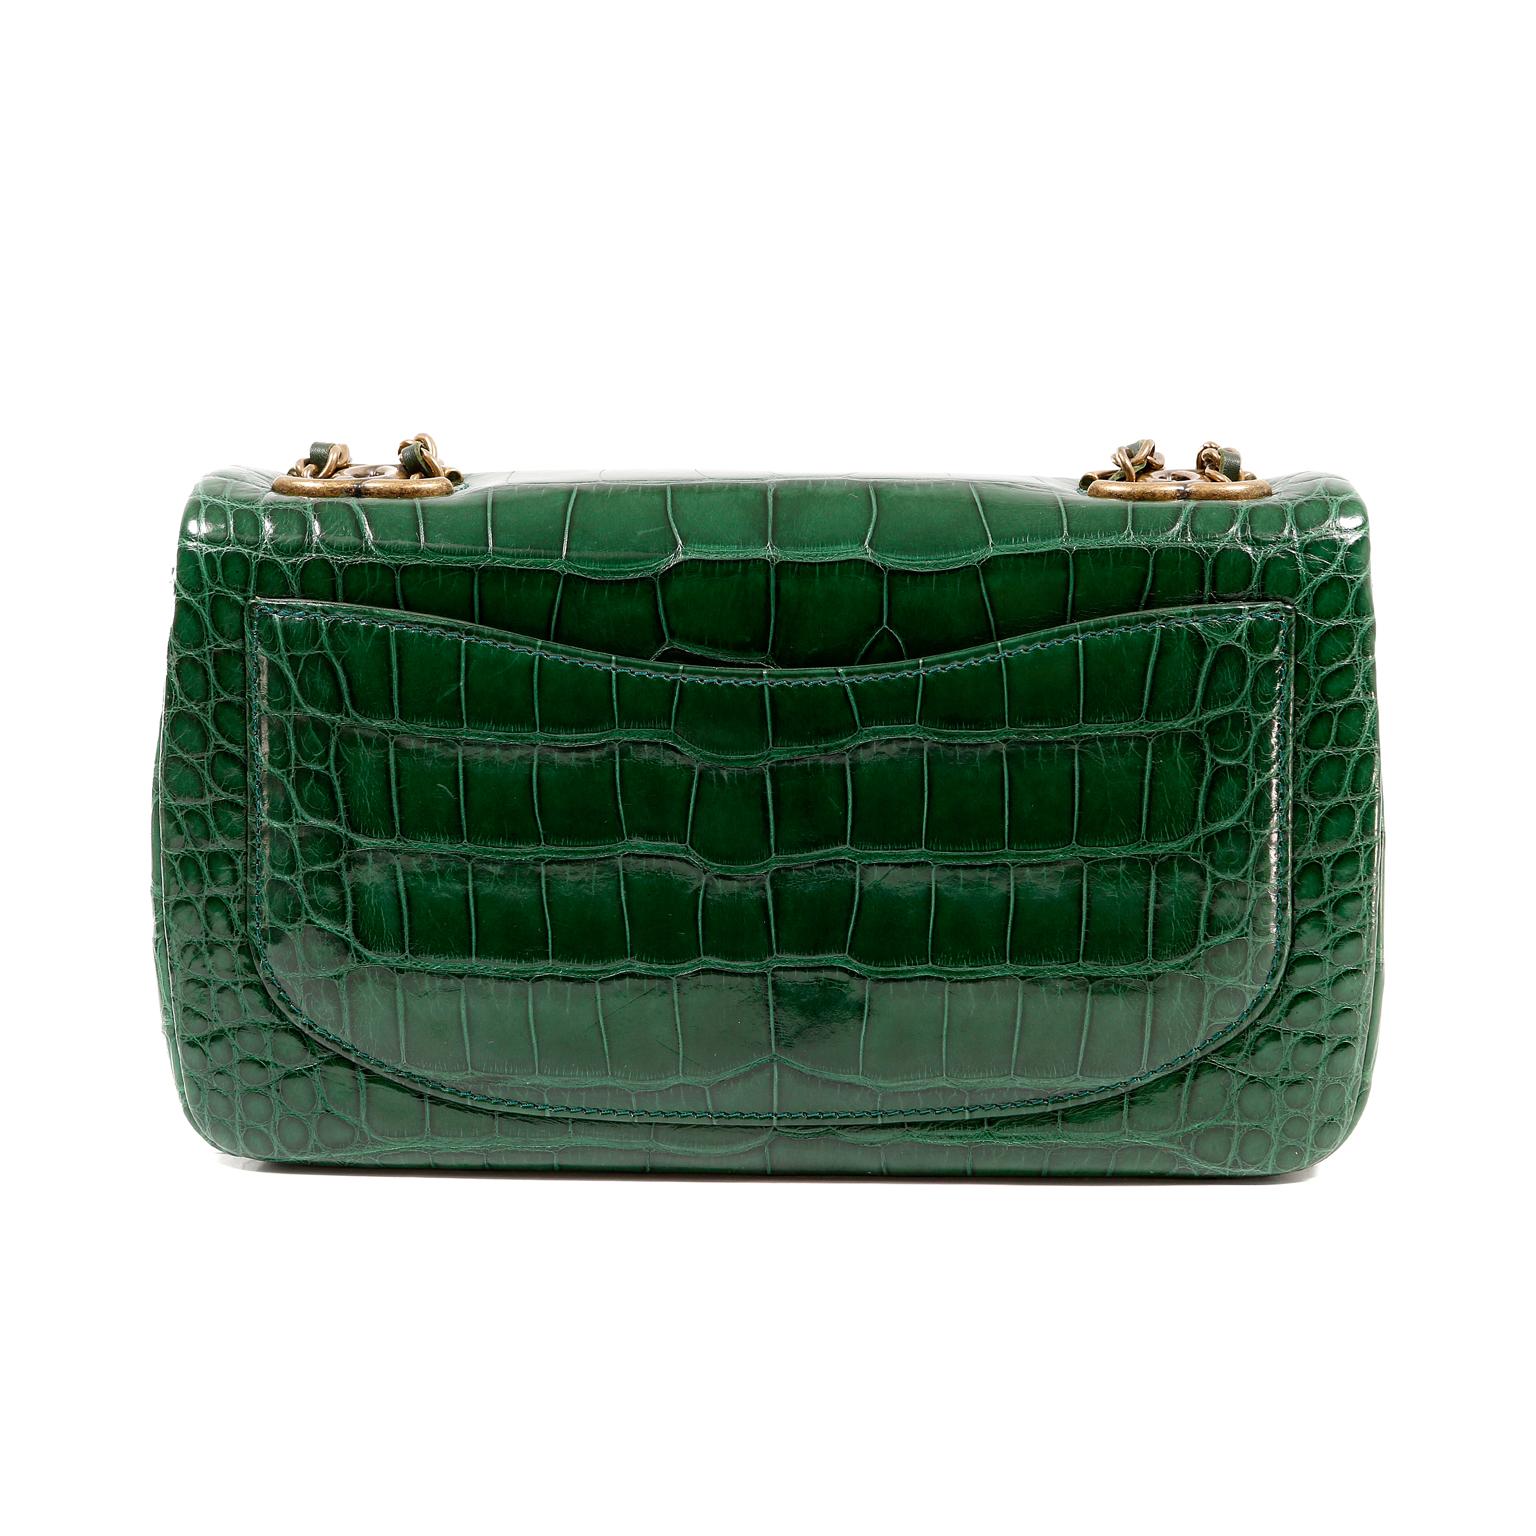 This authentic Chanel Emerald Green Alligator Medium Classic is in pristine condition.  The Timeless Classic is elevated to new heights in this rare exotic version.
Deep emerald green alligator skin is accented with antiqued gold interlocking CC